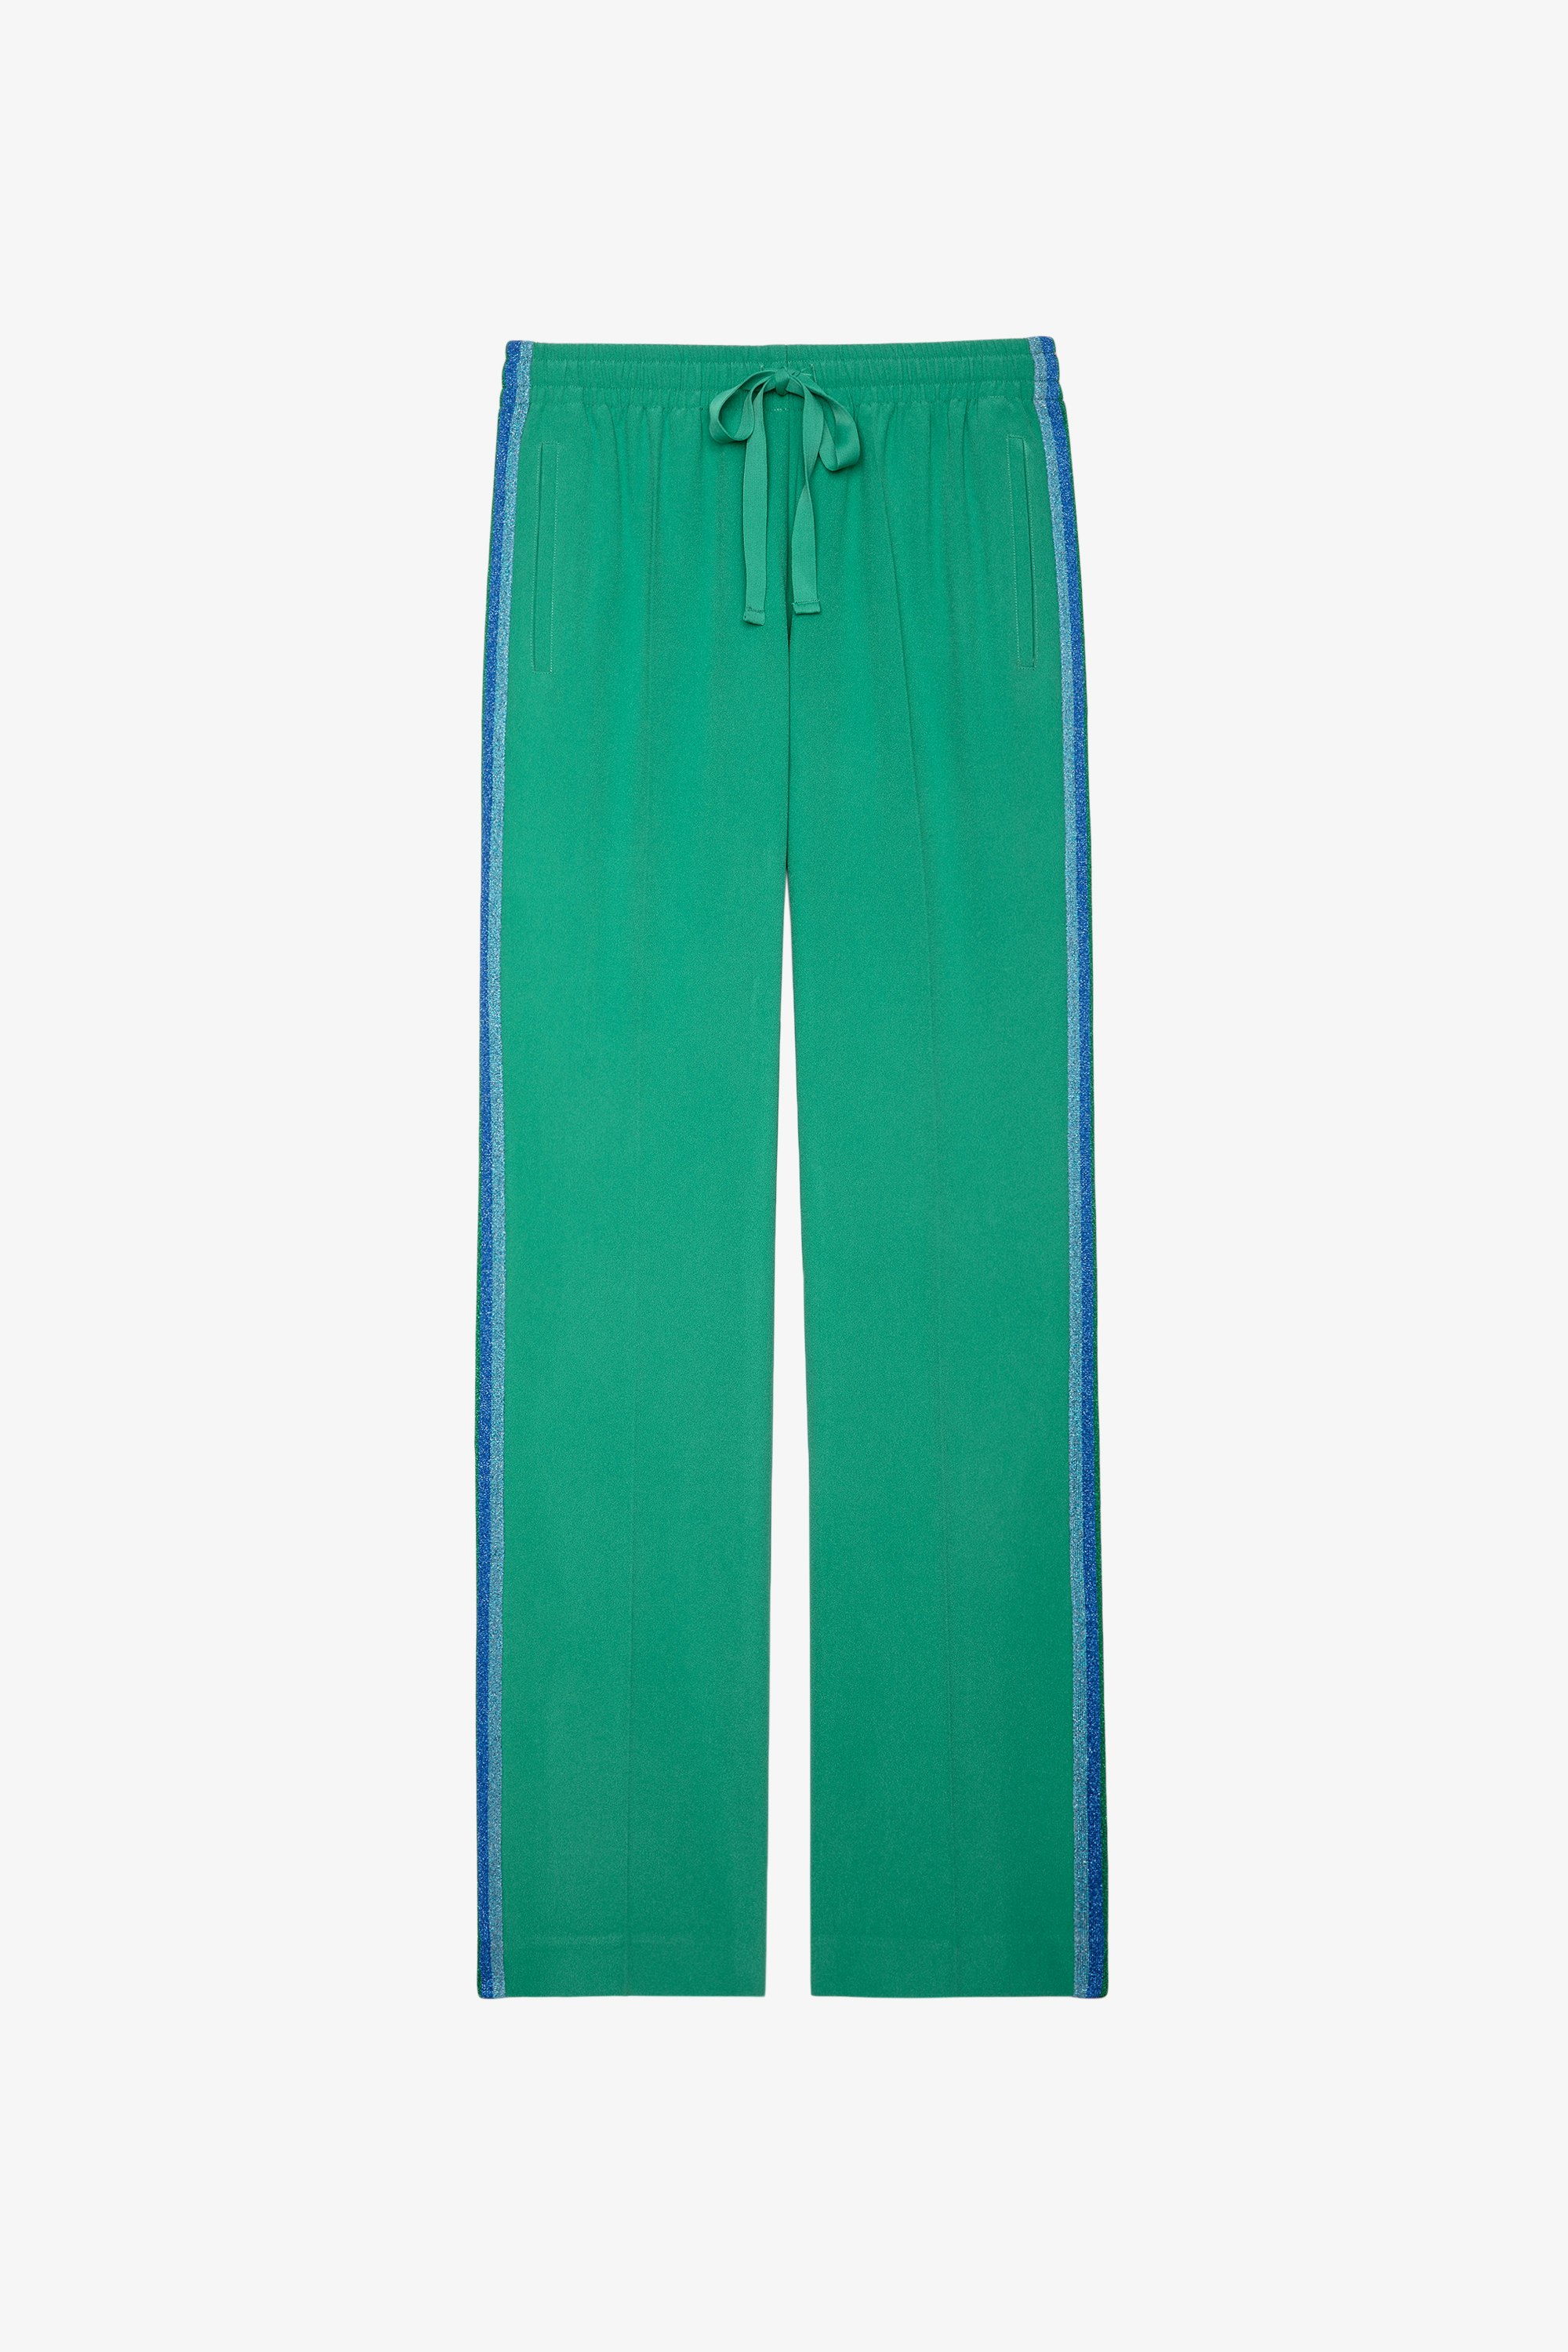 Pomy Crepe Trousers Women's flowing trousers in green with glittering side stripes